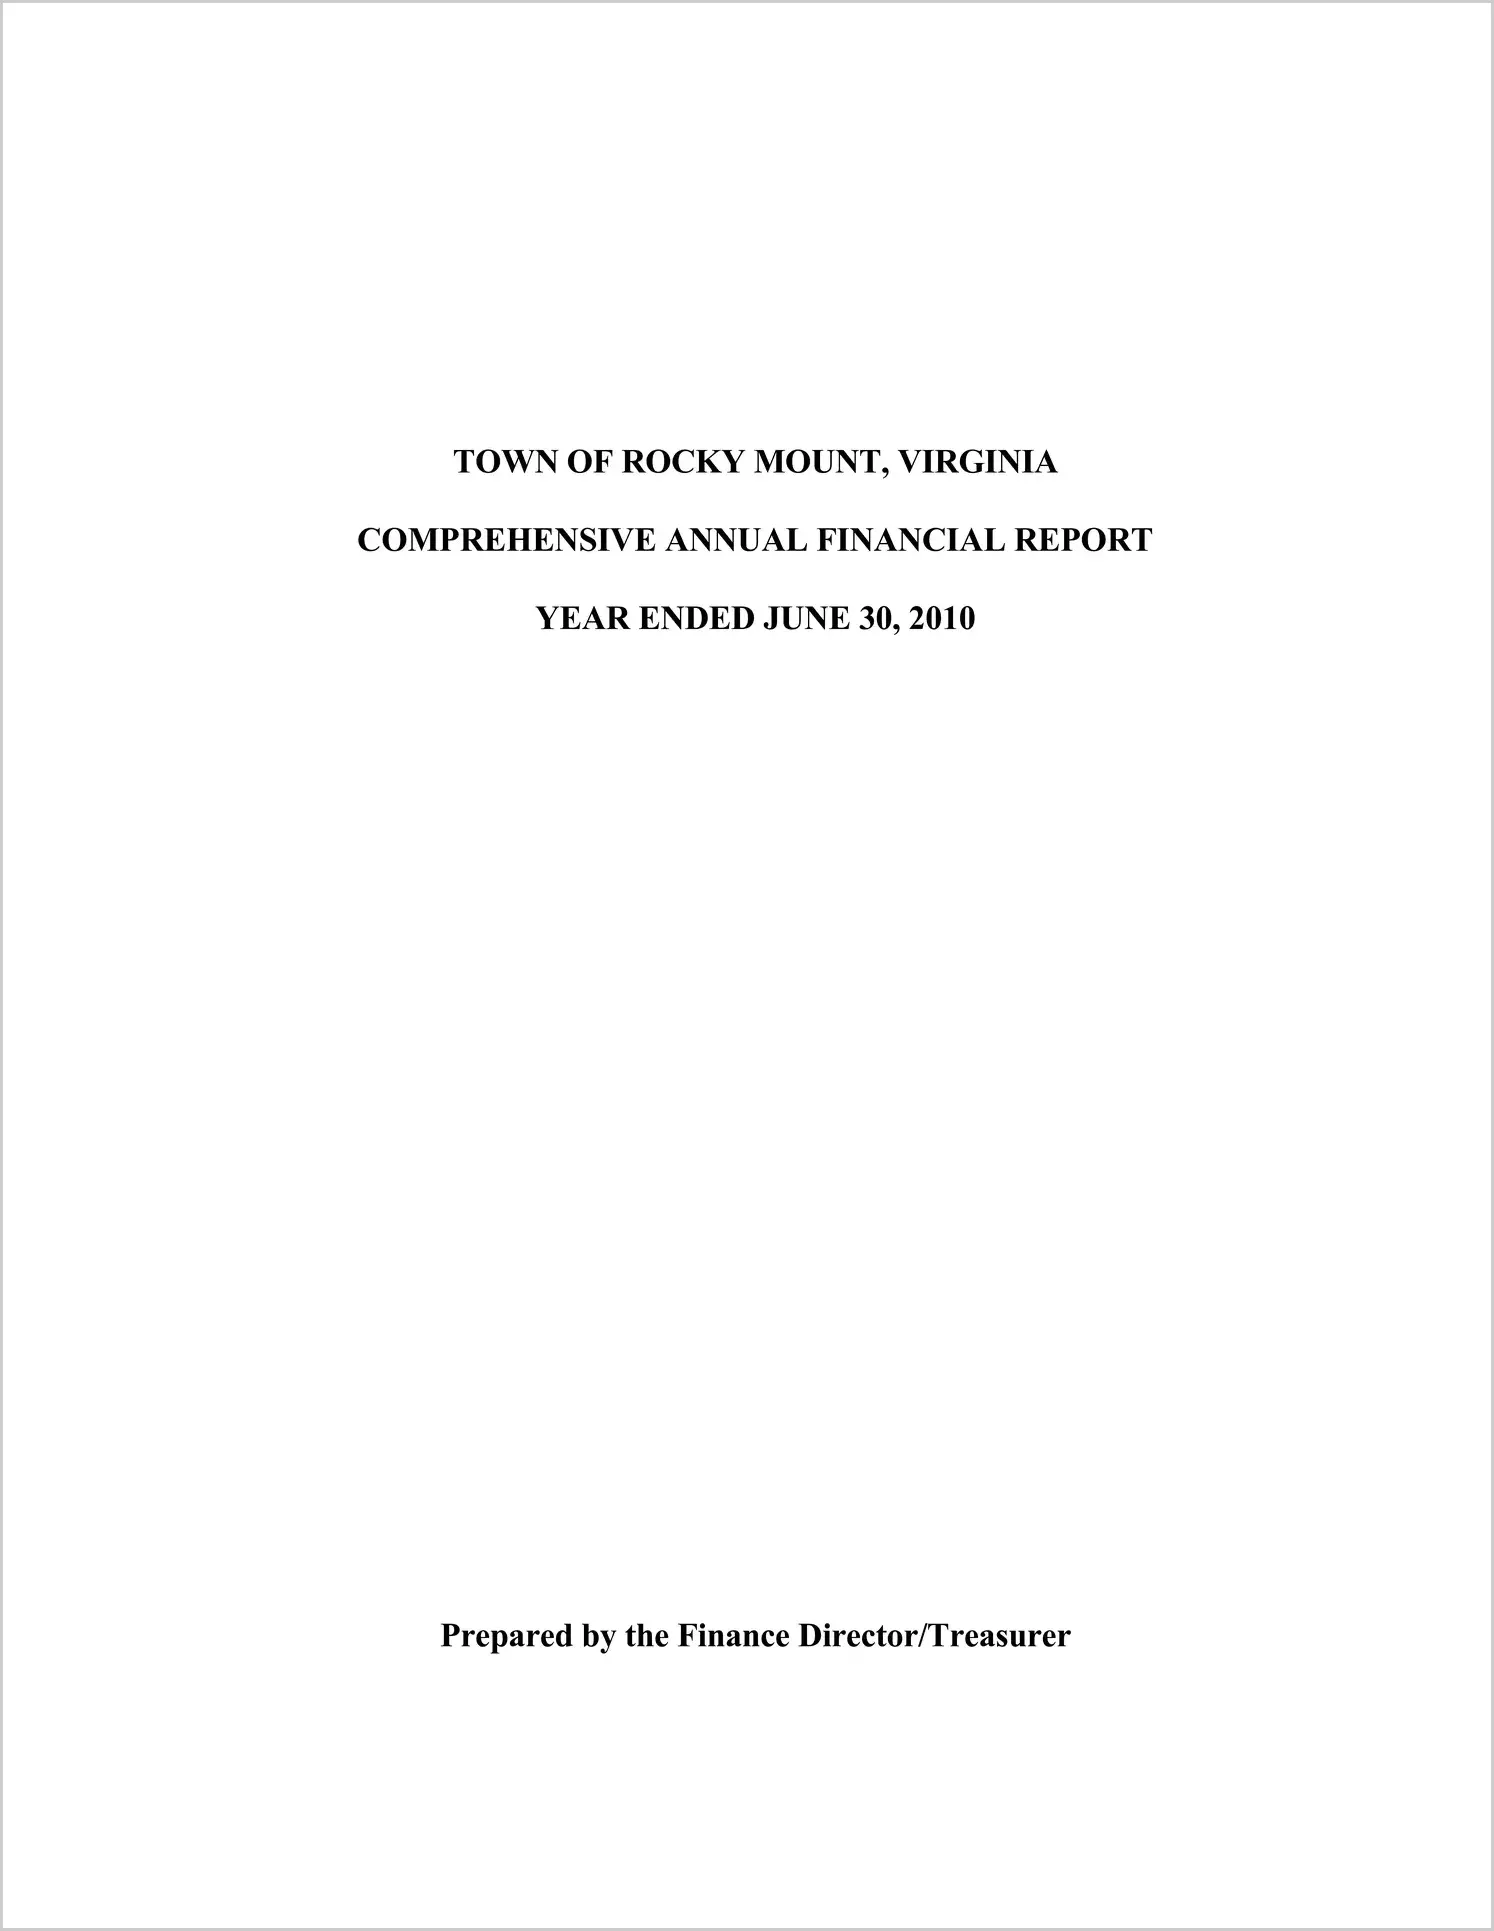 2010 Annual Financial Report for Town of Rocky Mount